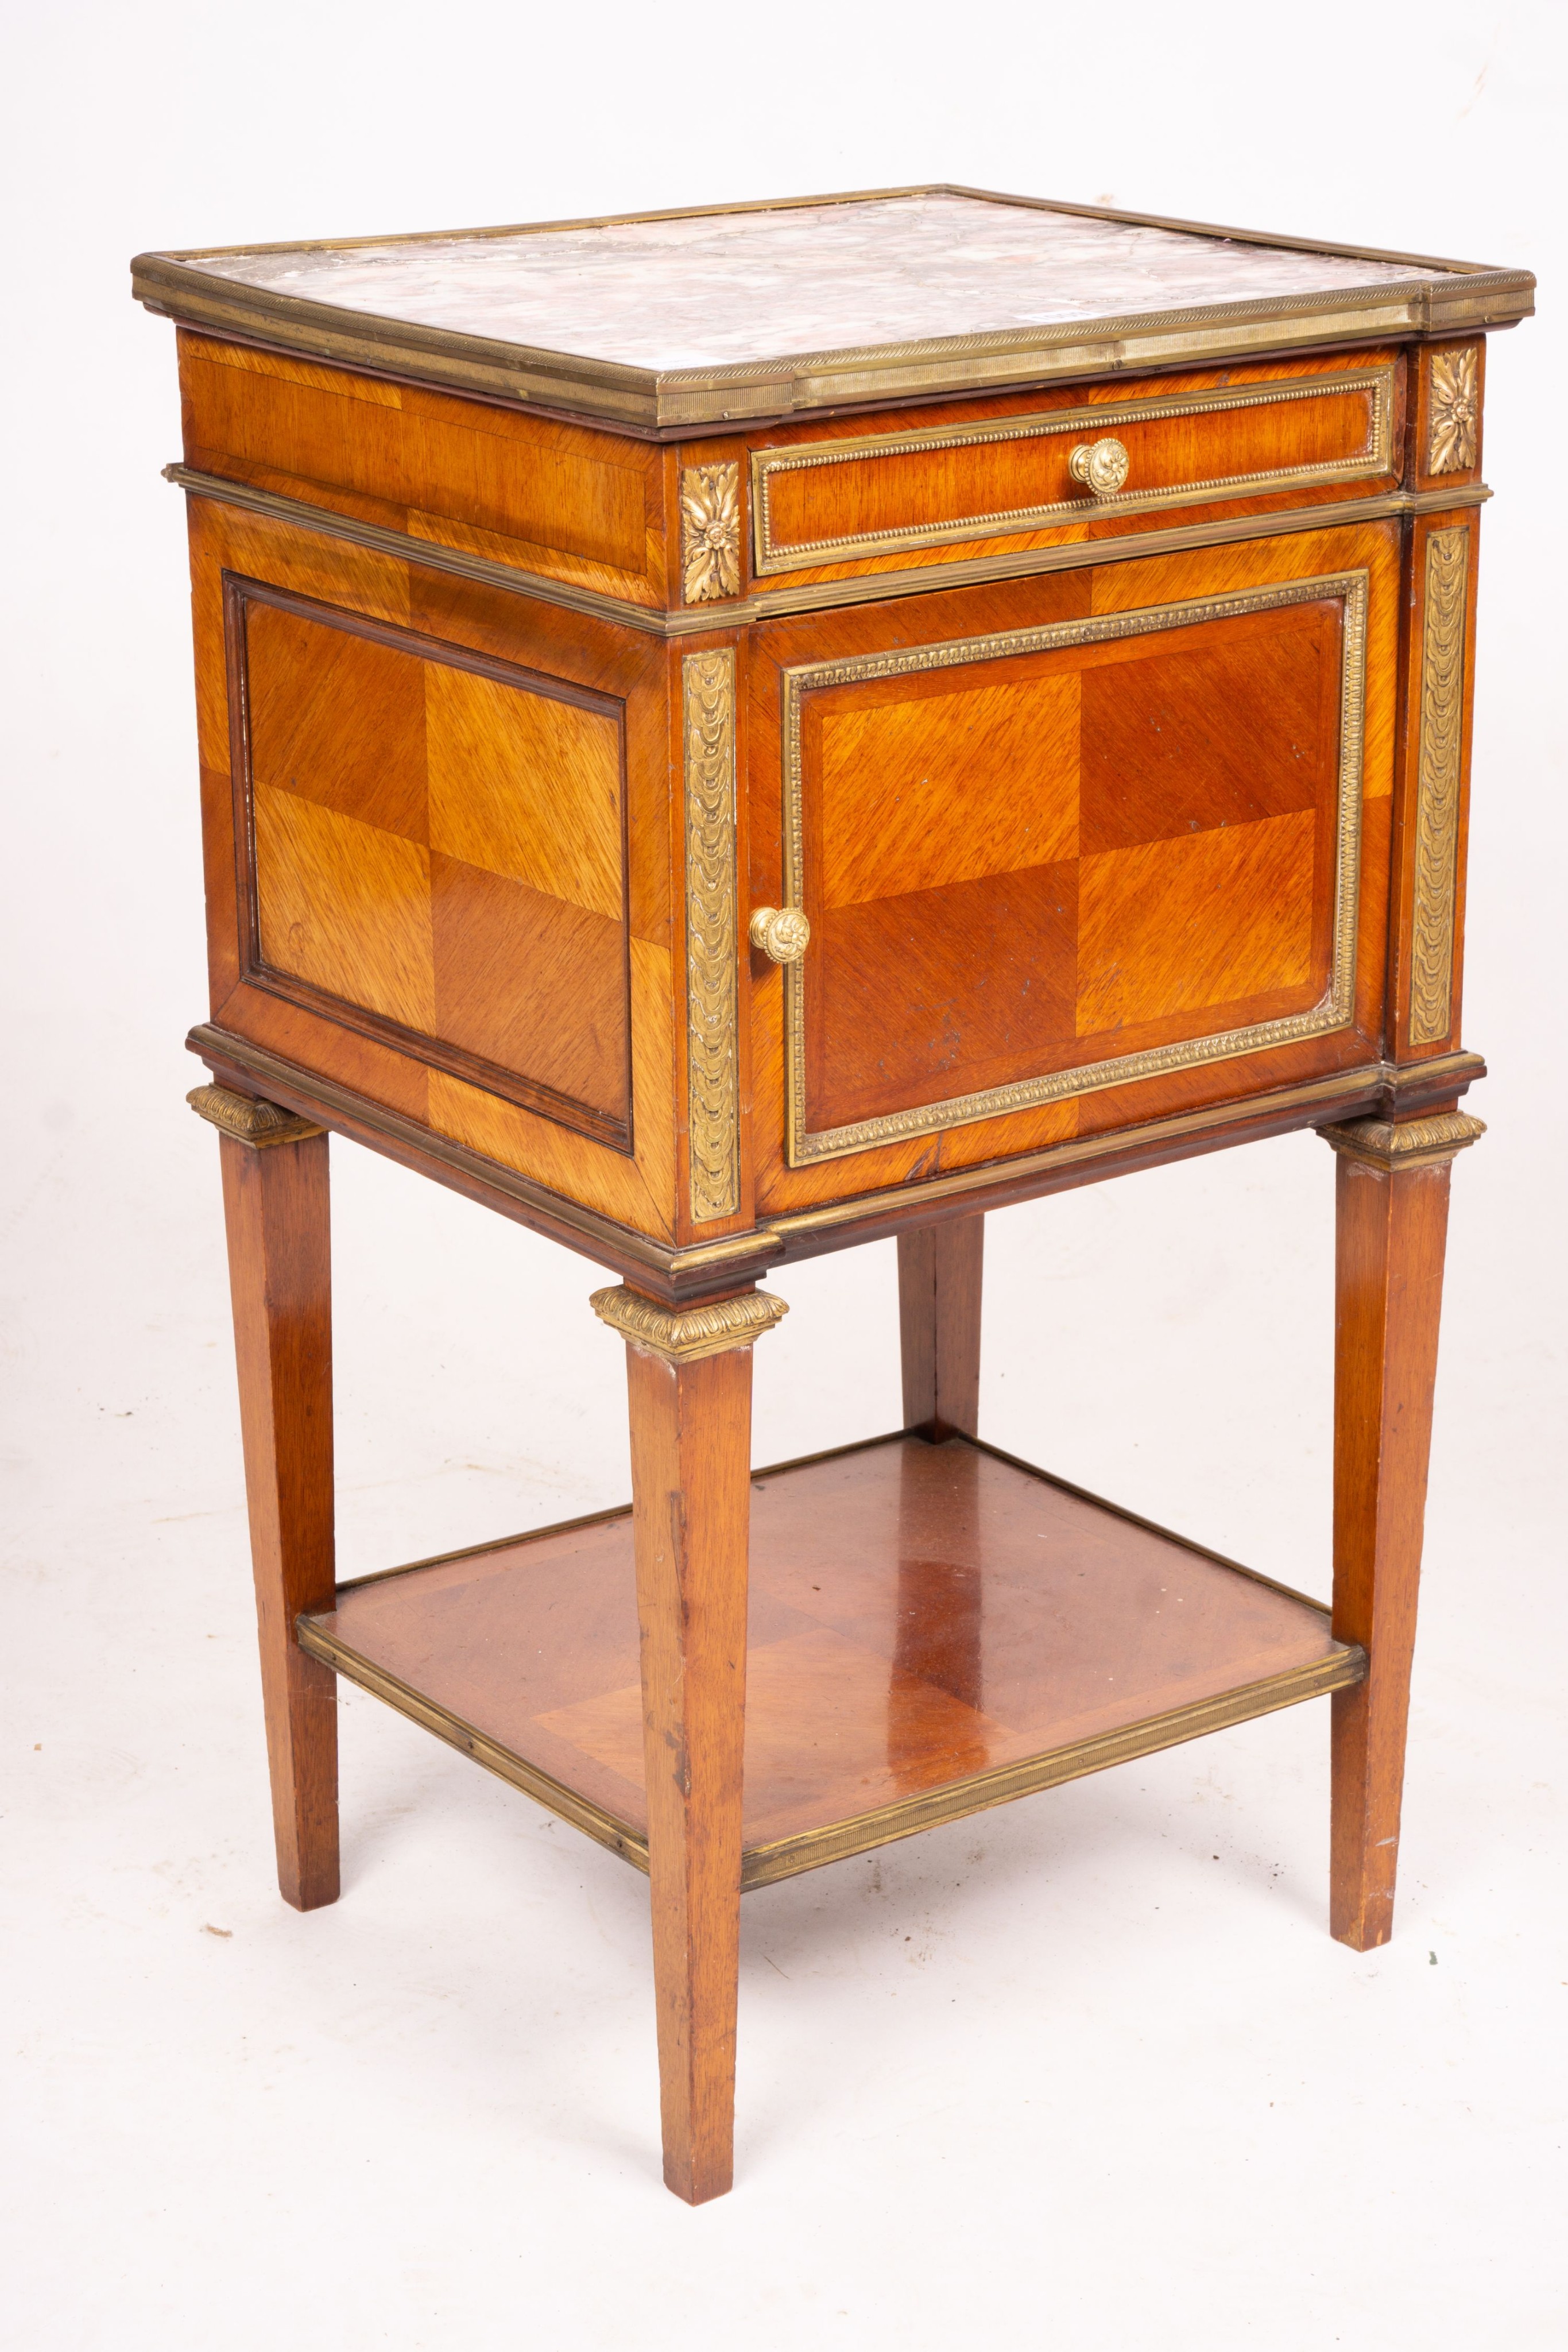 An early 20th century French marble top mahogany bedside cabinet, width 42cm, depth 38cm, height 75cm